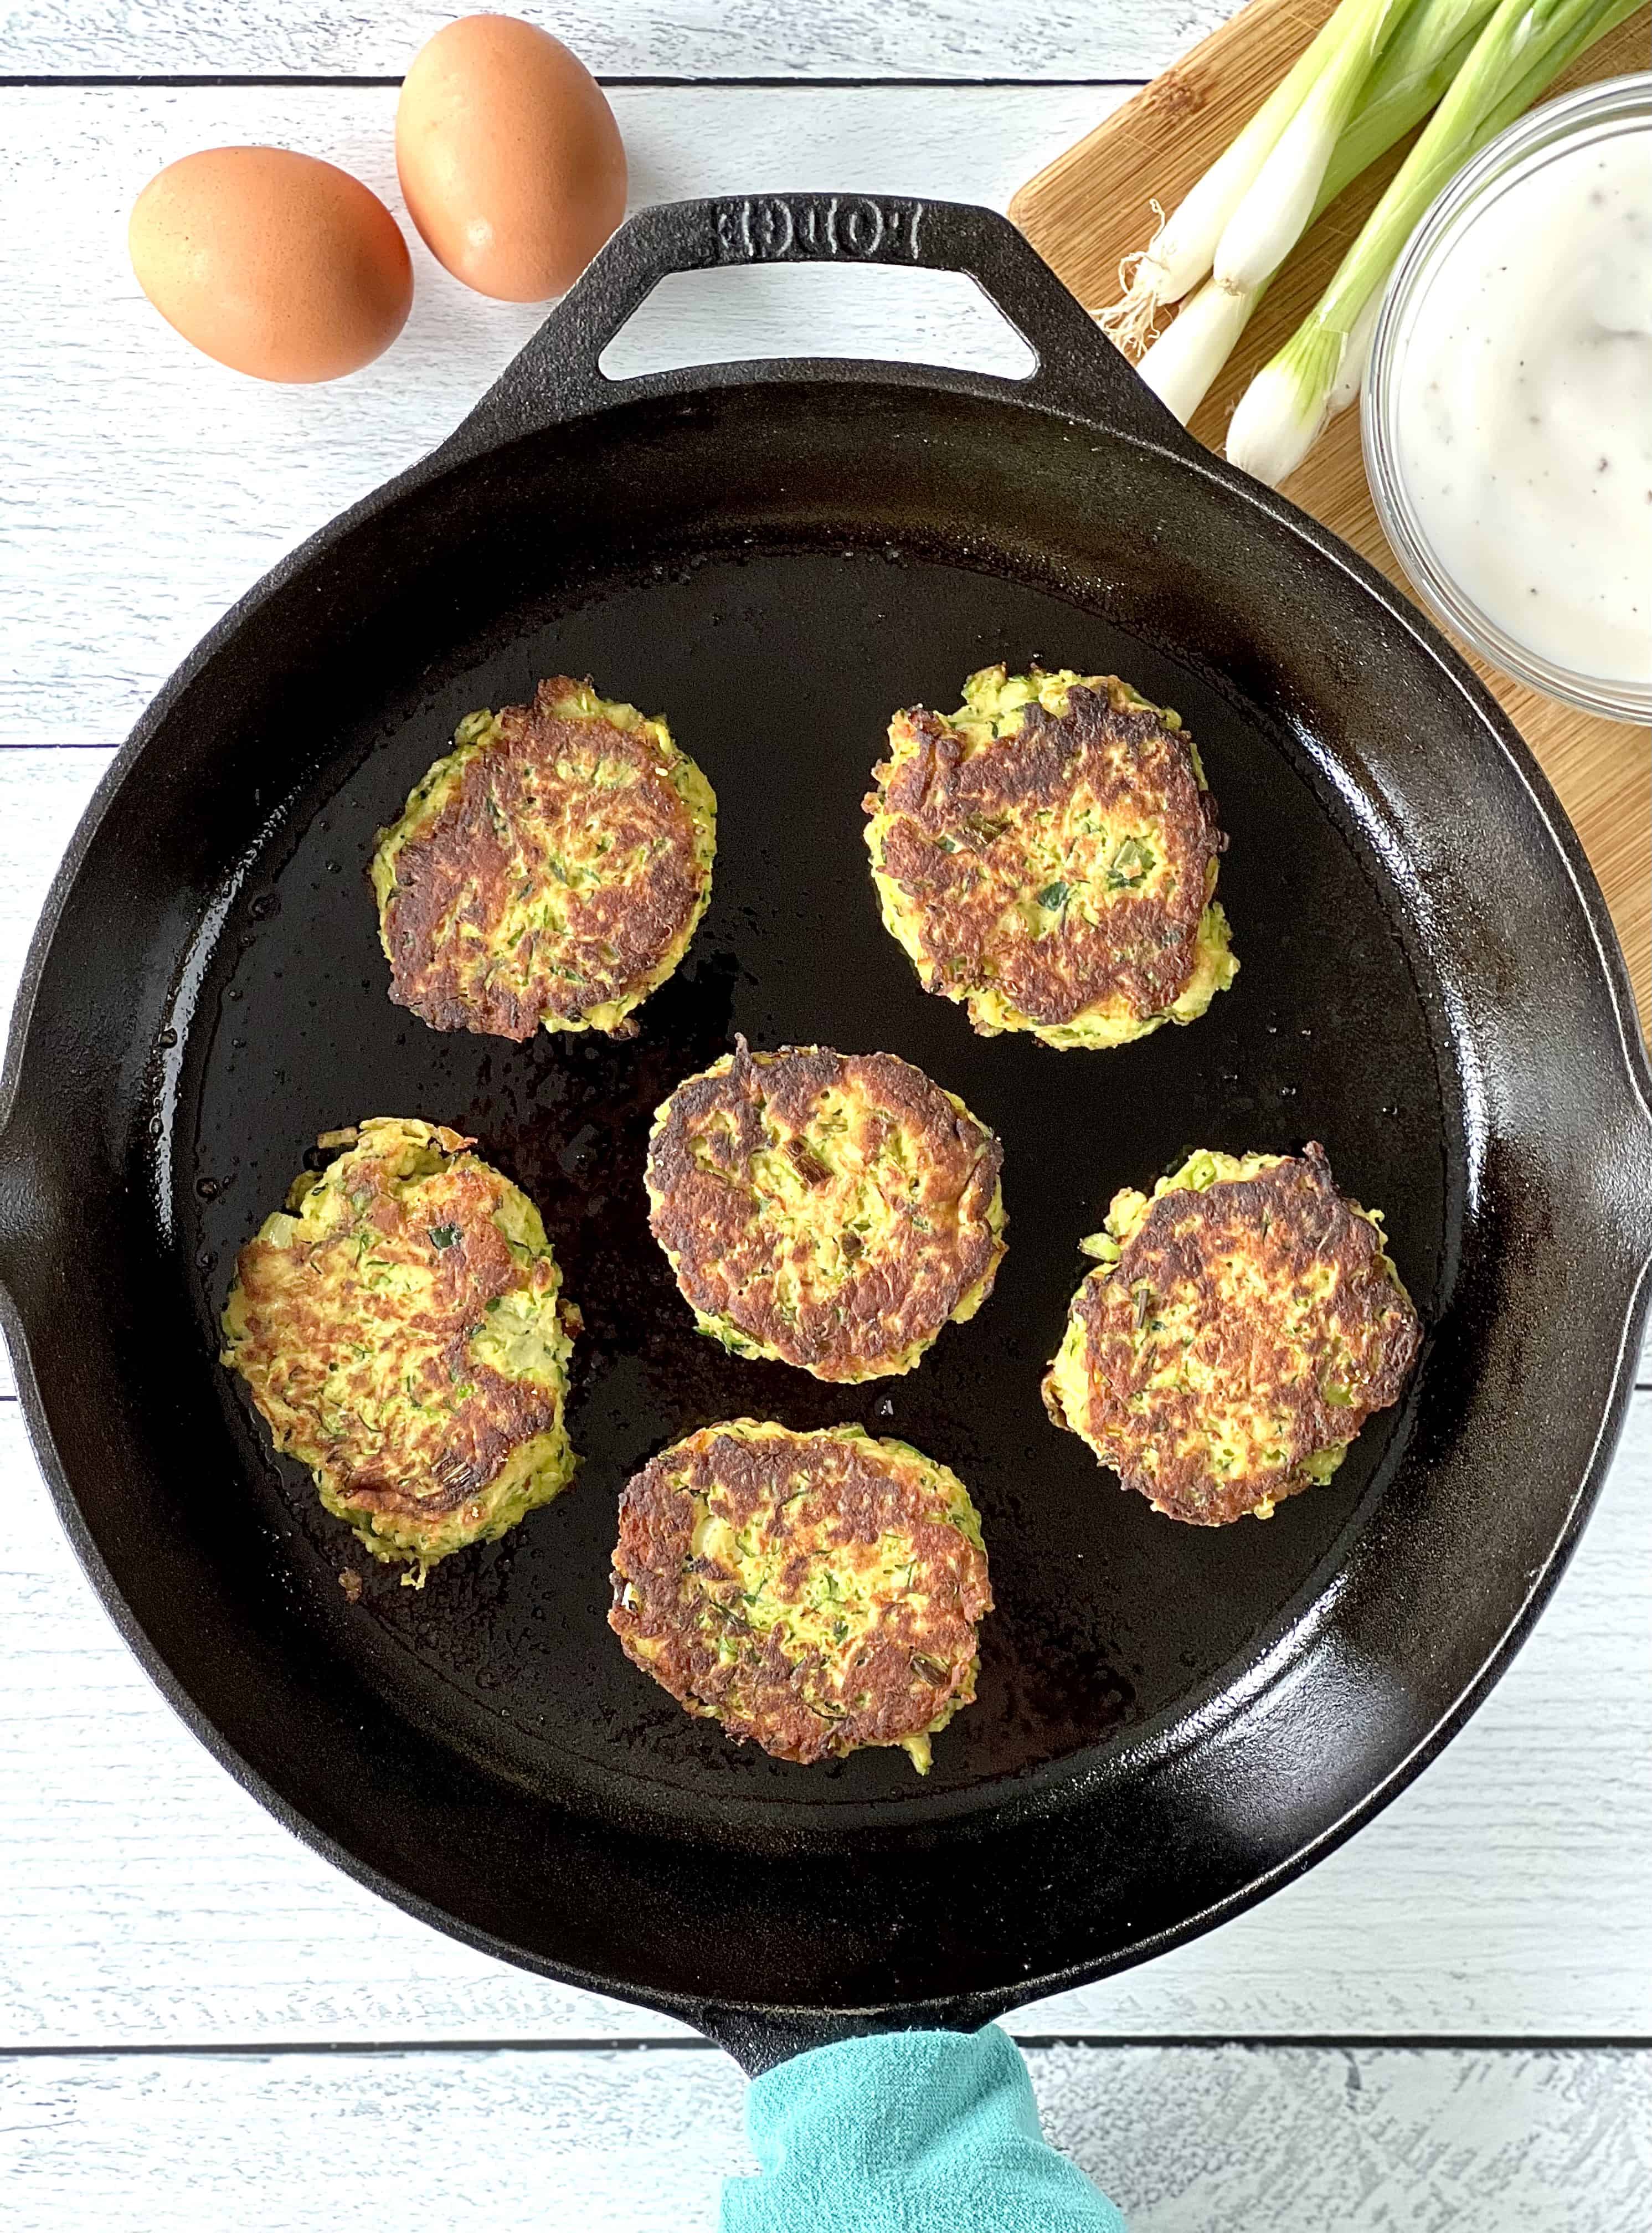 healthy zucchini fritters in a cast iron skillet with a blue towel around the handle, sitting on a white wooden table next to a bowl of yogurt sauce, scallions and eggs